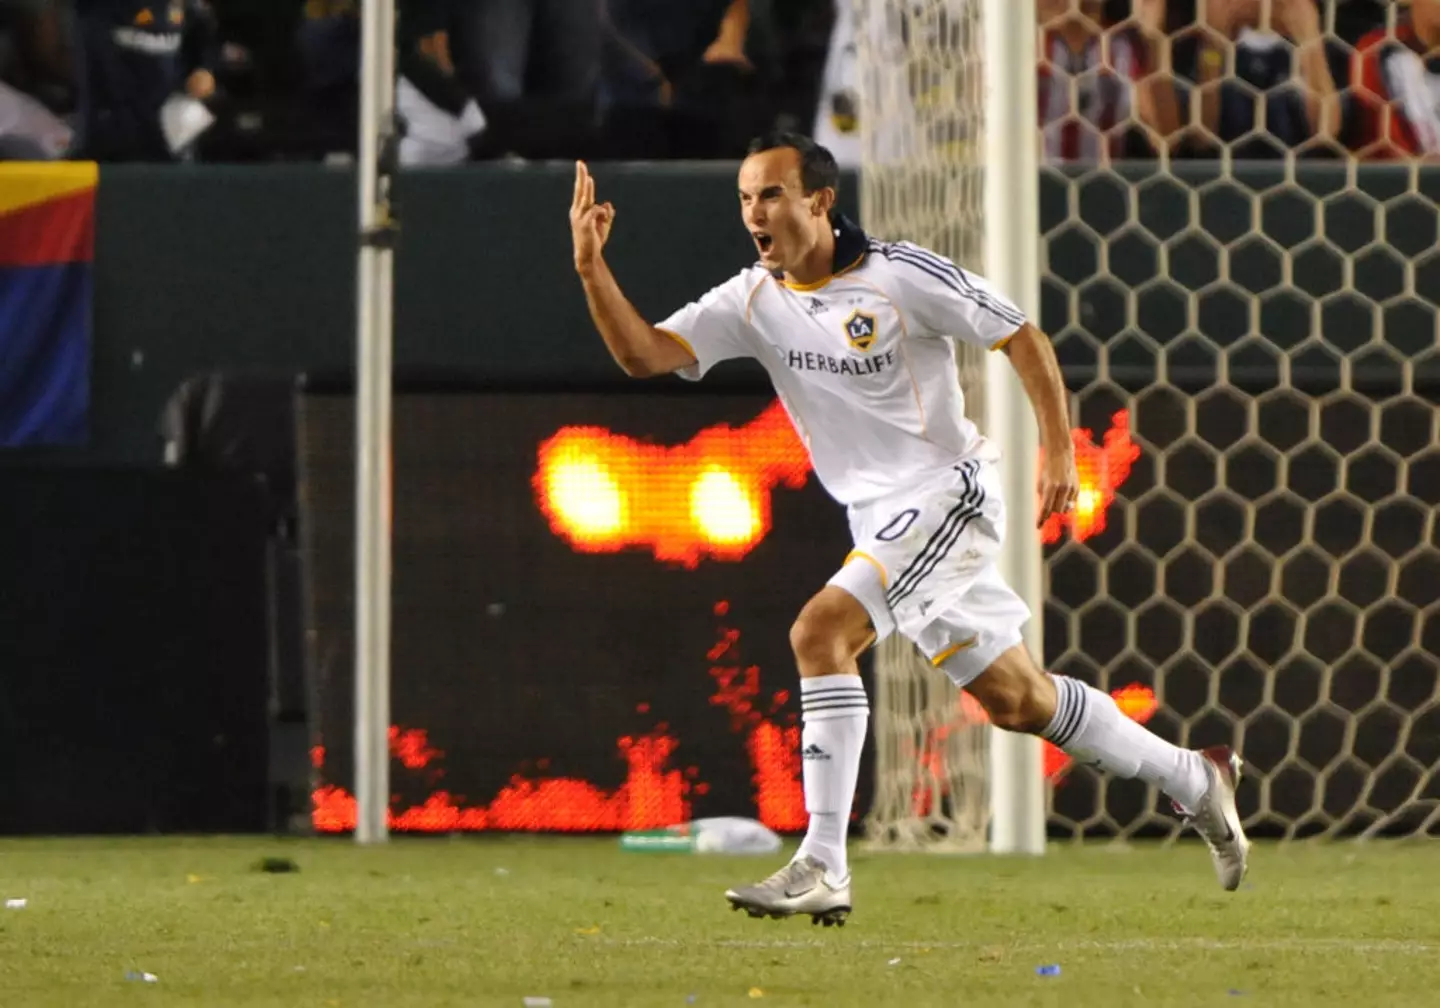 The American footballing icon is best known for his time at LA Galaxy. (Chris WIlliams/Icon Sportswire via Getty Images)